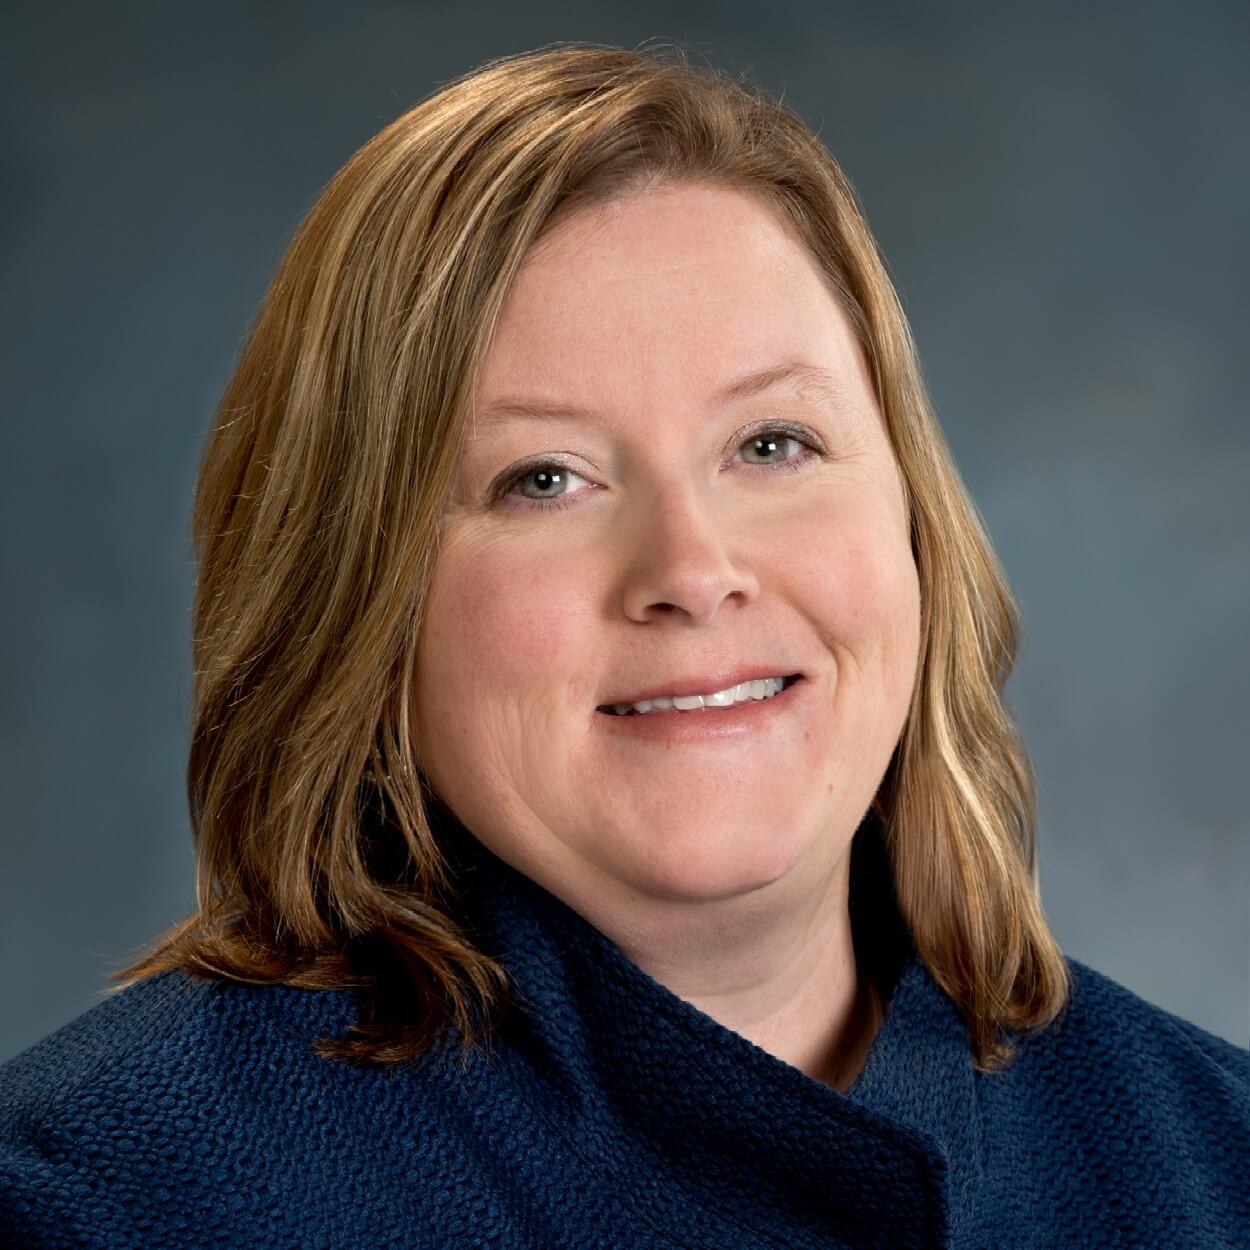 Professional headshot of Laura Nelson, Chief Operating Officer.